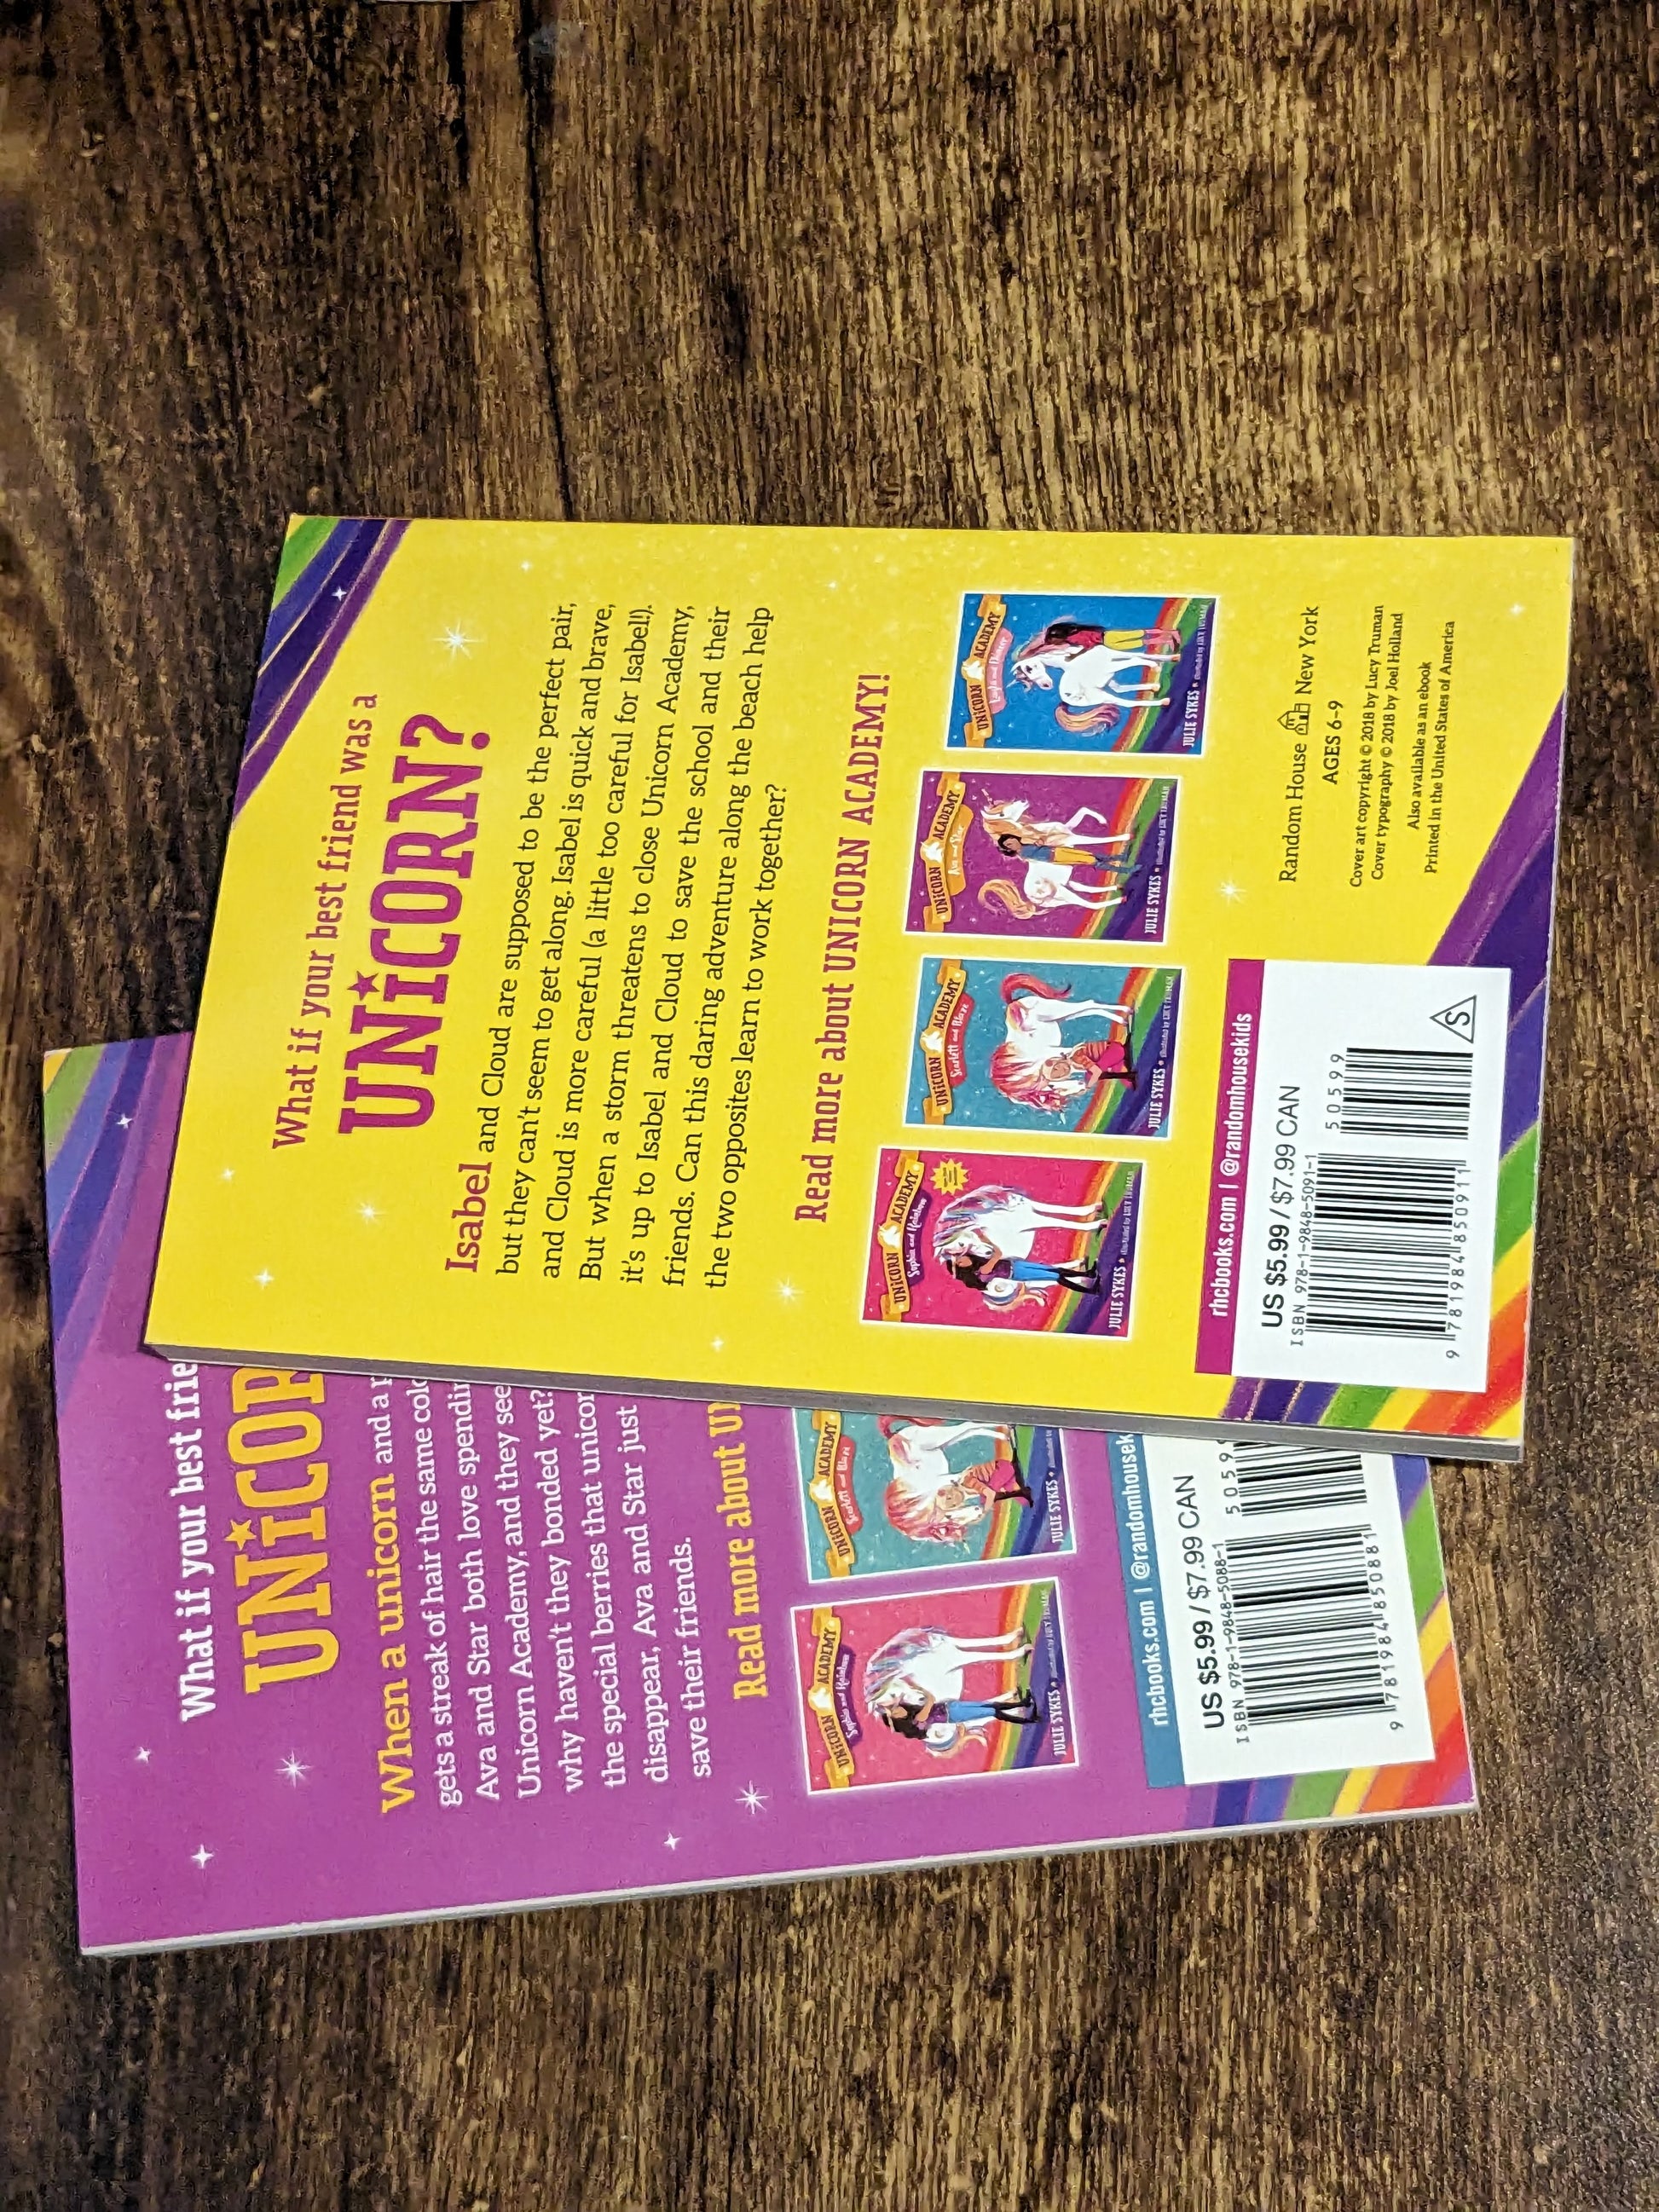 UNICORN ACADEMY COLLECTION - Lot of 4 Paperback Chapter Books with Box, Julie Sykes Bestselling Fantasy Fun Series Kids Book Retro Rainbow - Asylum Books